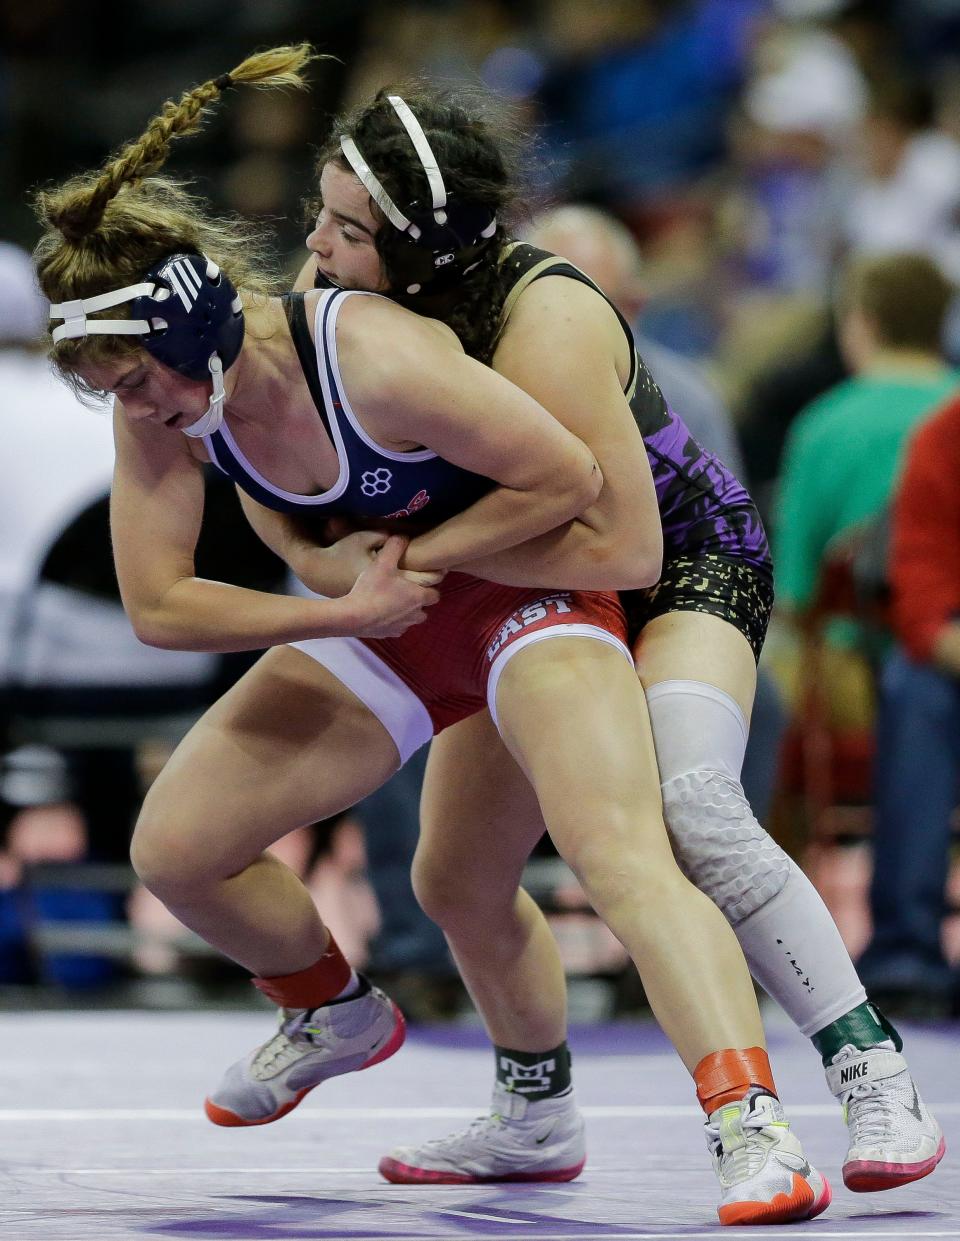 Two Rivers High School's Angie Bianchi wrestles against Brookfield East High School's Lily Becker in a girls 114-pound semifinal match during the 2023 WIAA individual state wrestling tournament on Friday, February 24, 2023, at the Kohl Center in Madison, Wis. Tork Mason/USA TODAY NETWORK-Wisconsin 